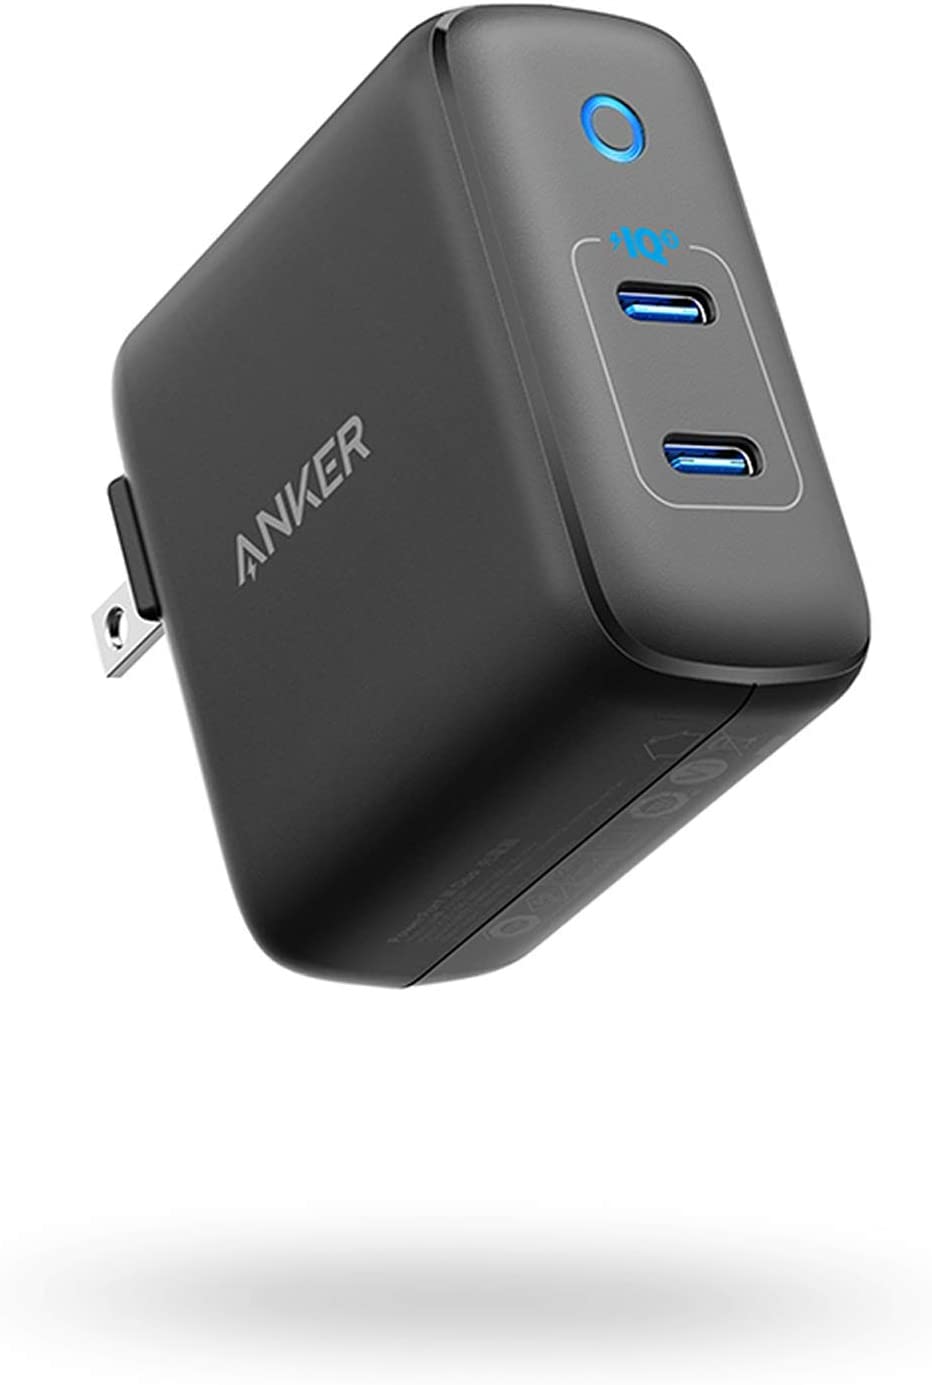 Phone Charger USB-C, Anker 36W 2-Port PIQ 3.0, PowerPort III Duo Type C Foldable Fast Charger, Power Delivery for iPhone 12/12 Mini/12 Pro/12 Pro Max/11/XR, Galaxy, Pixel, iPad Pro and More